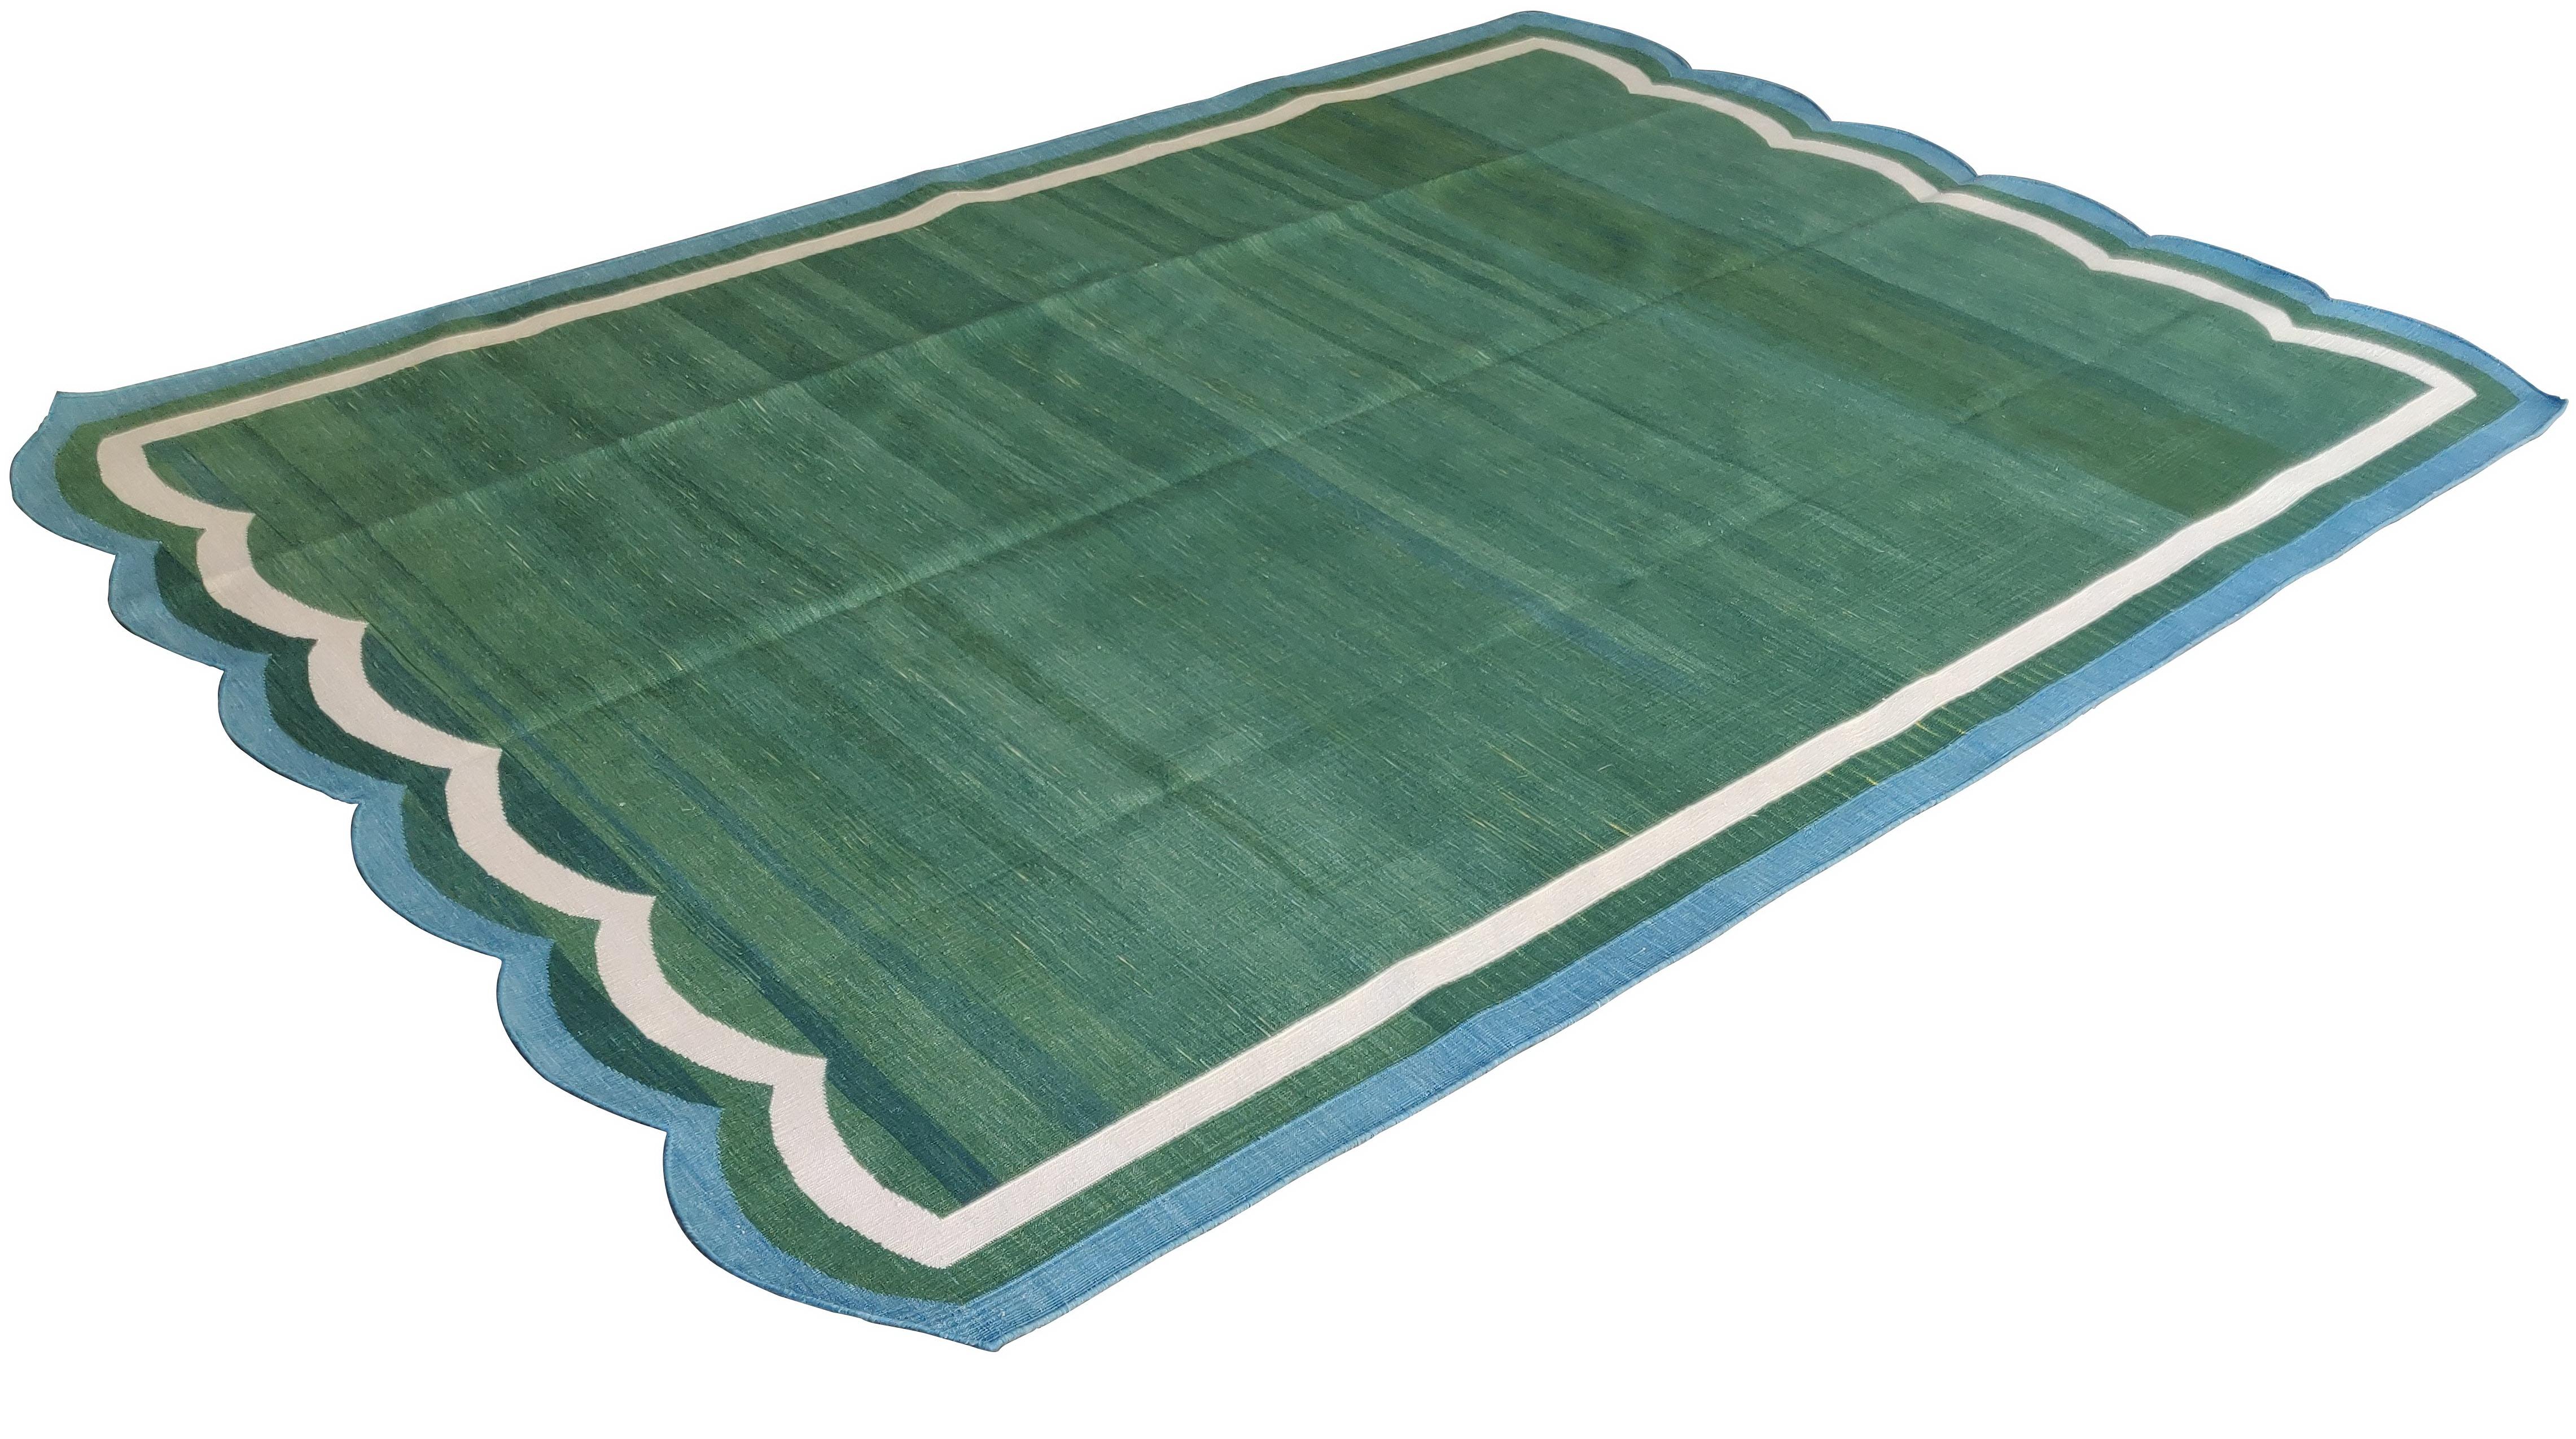 Cotton Vegetable Dyed Forest Green And Blue Two Sided Scalloped Rug-6'x9'
These special flat-weave dhurries are hand-woven with 15 ply 100% cotton yarn. Due to the special manufacturing techniques used to create our rugs, the size and color of each